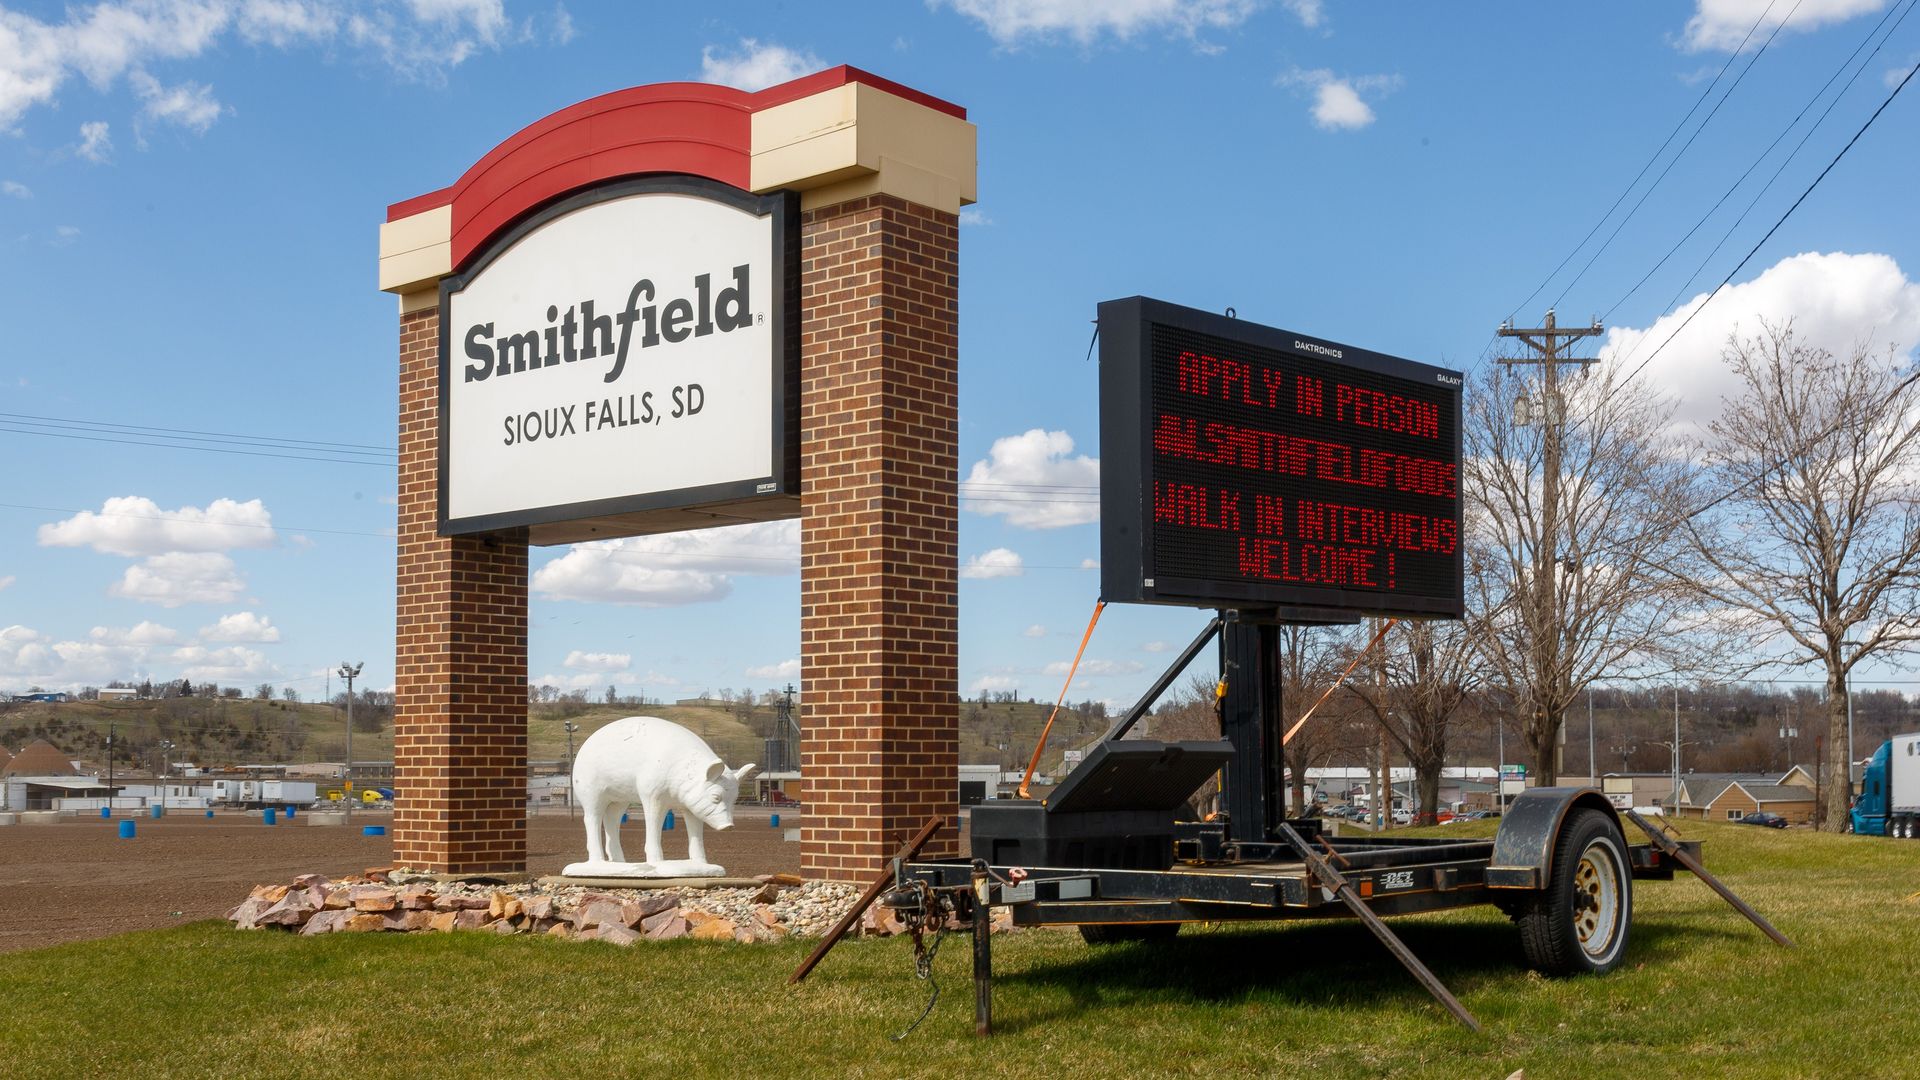 A sign outside the Smithfield Foods pork processing plant in South Dakota that says "walk-in interviews welcome"